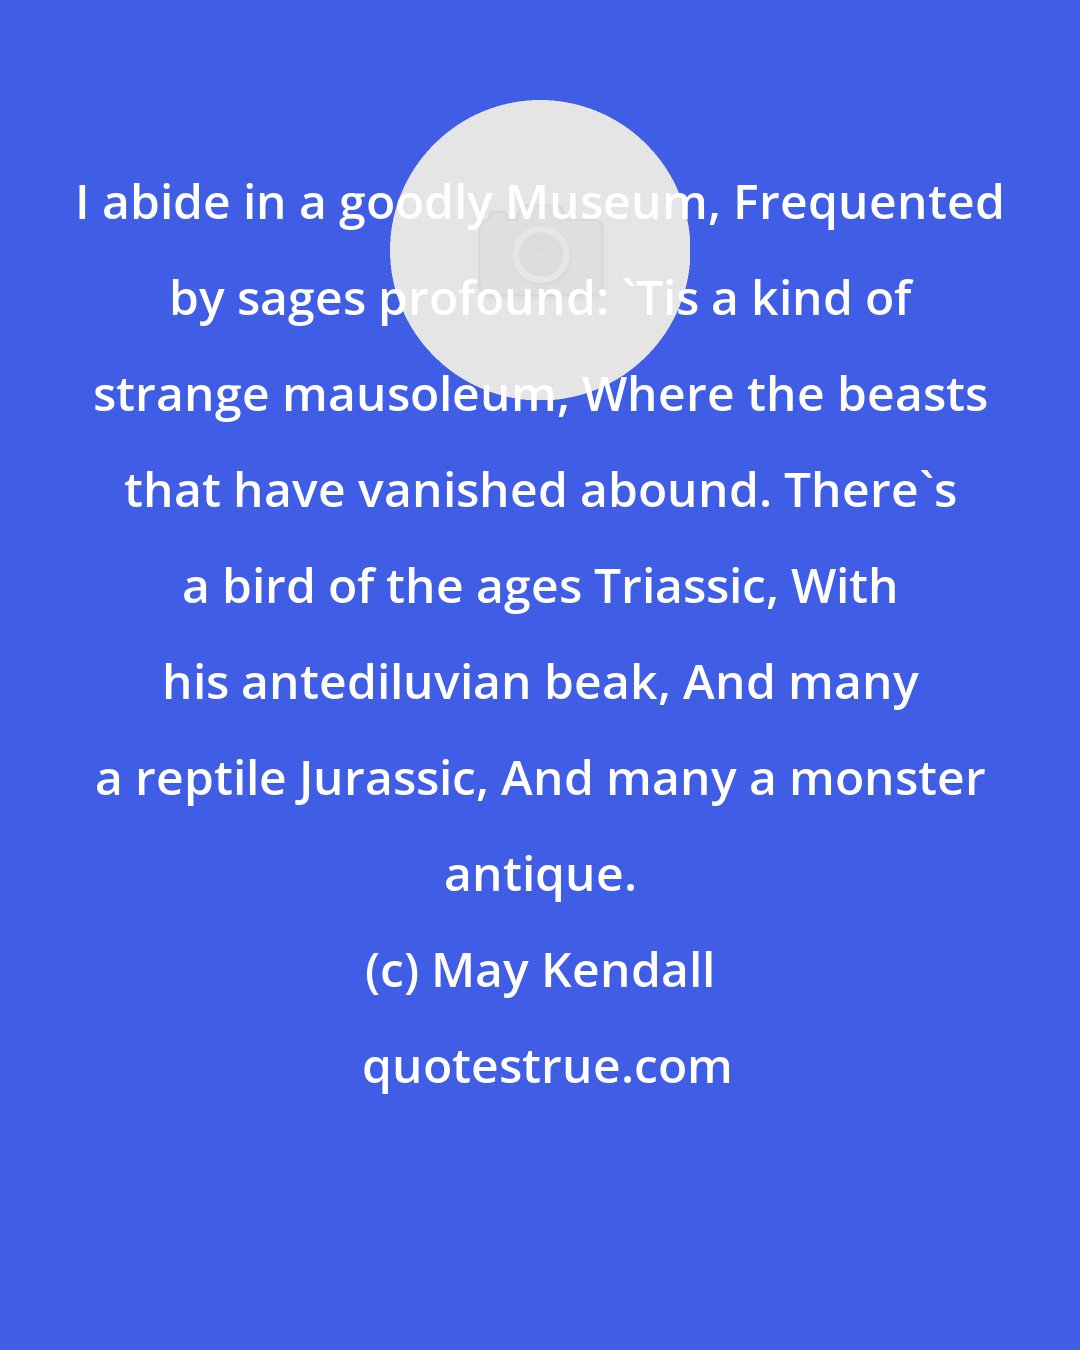 May Kendall: I abide in a goodly Museum, Frequented by sages profound: 'Tis a kind of strange mausoleum, Where the beasts that have vanished abound. There's a bird of the ages Triassic, With his antediluvian beak, And many a reptile Jurassic, And many a monster antique.